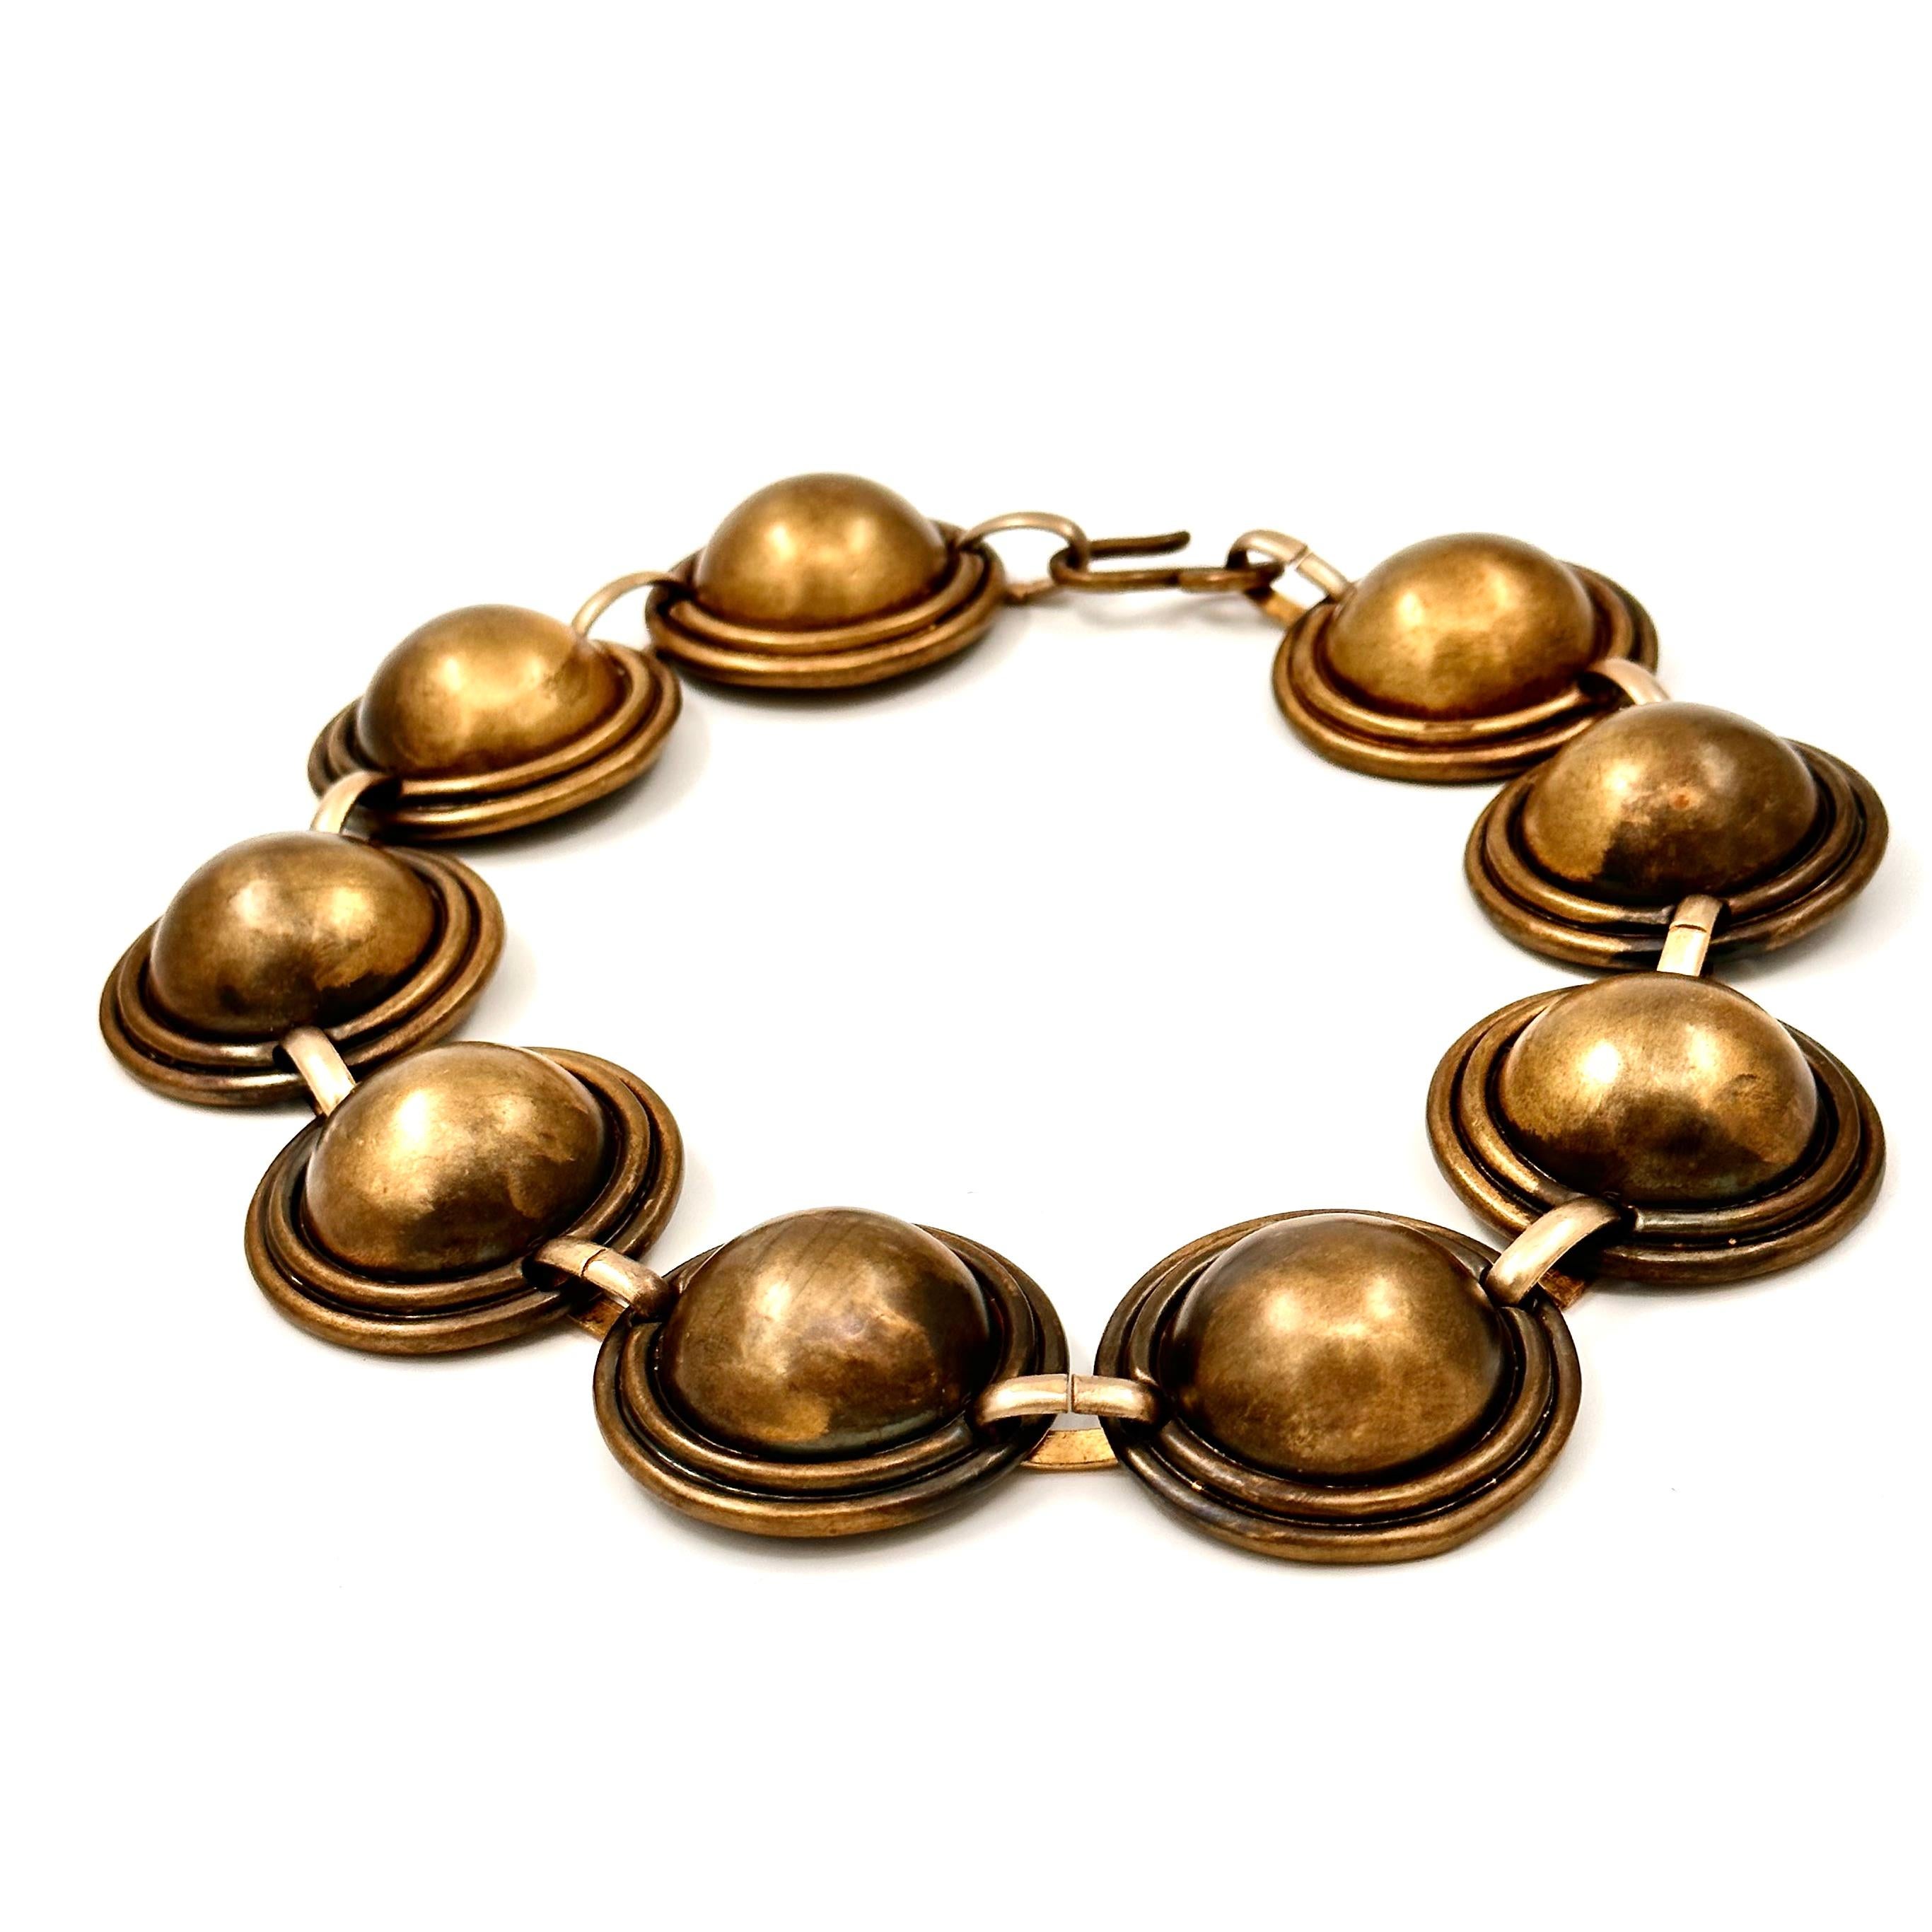 This bold strong and emphatic design is constructed of large oxidized brass domes, linked into a high fitting collar. Looking medieval and luscious, like out of a a movie, this beautiful and very simple necklace commands attention even in its more